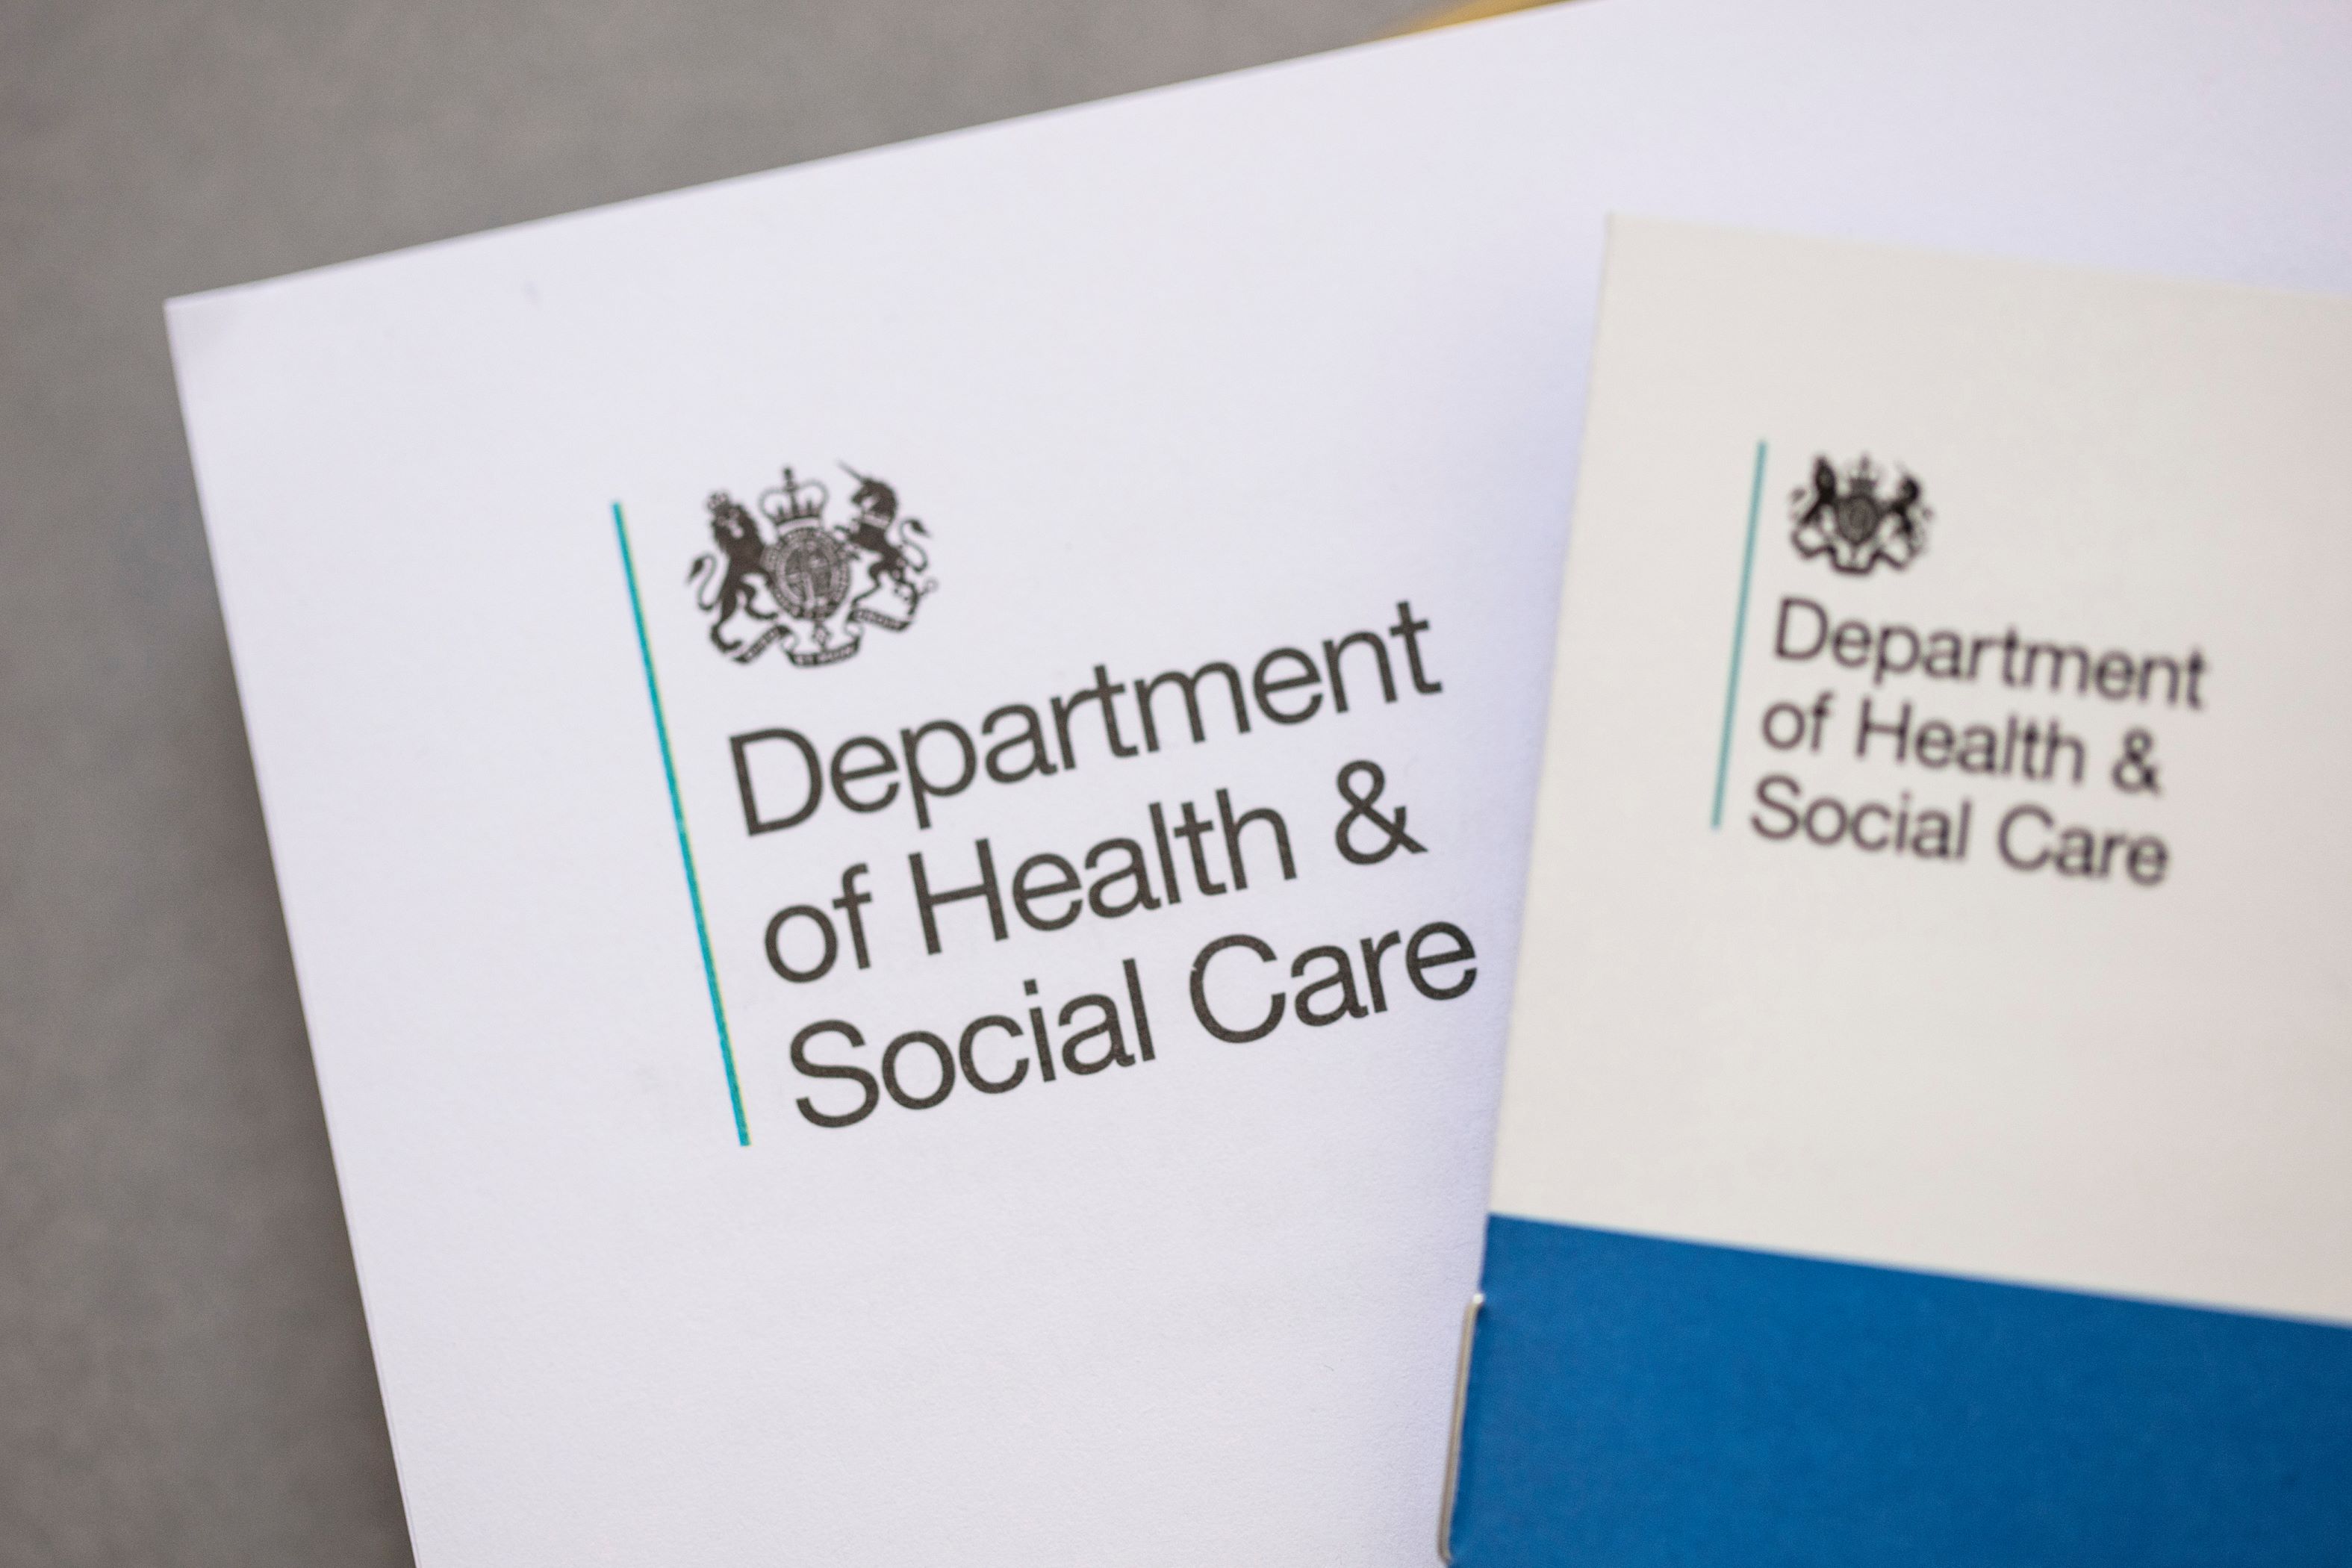 Department of Health and Social Care logo on document